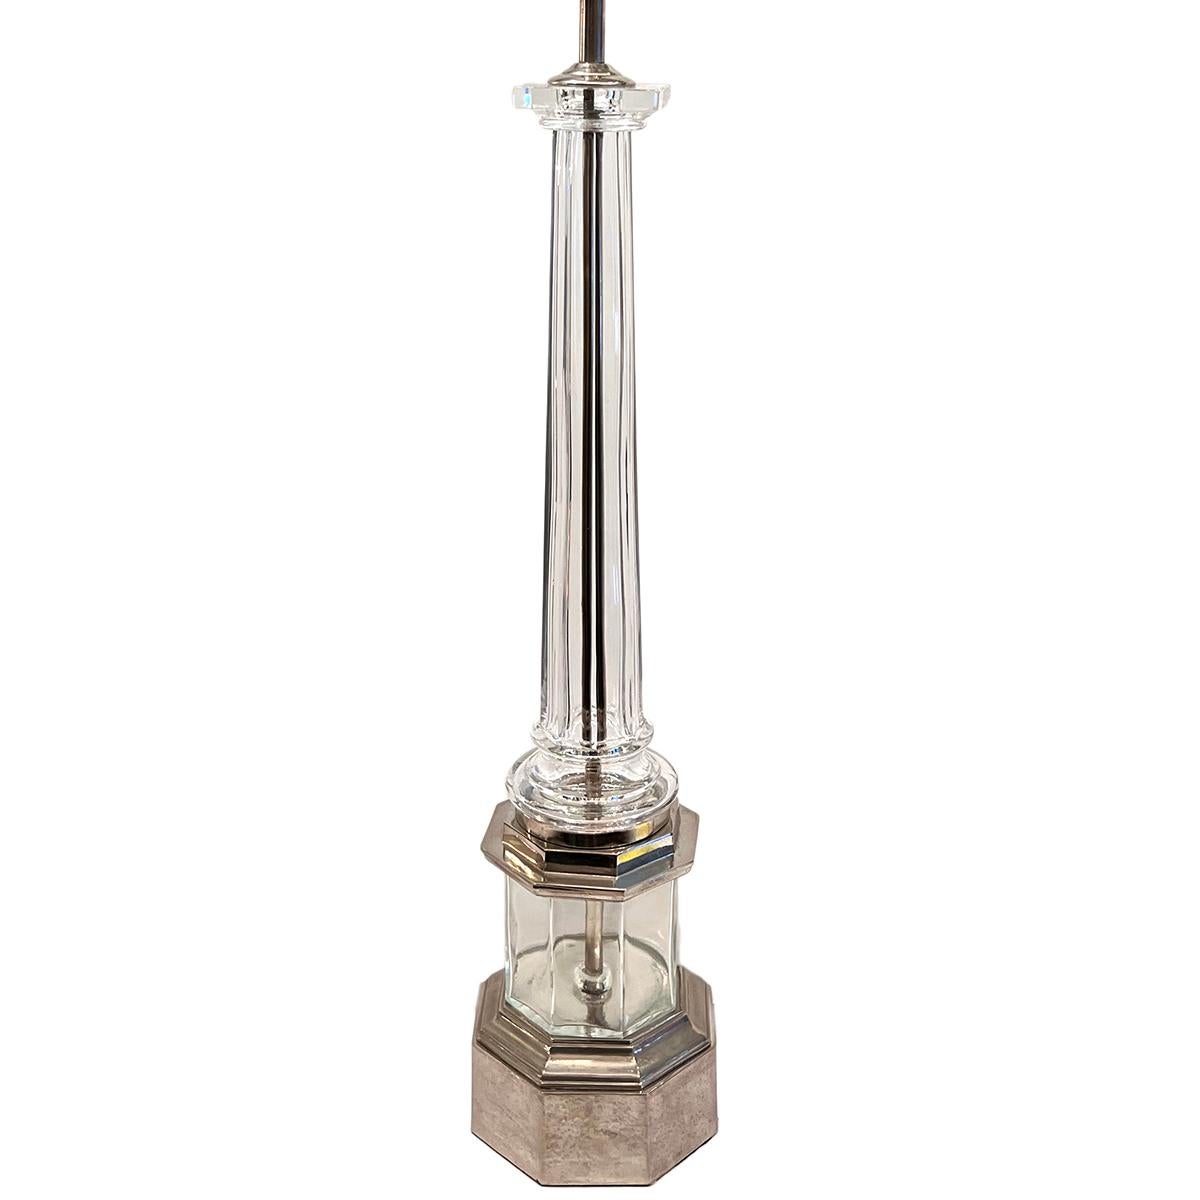 A circa 1950's French molded glass lamp with pedestal base.

Measurements:
Height of body: 26